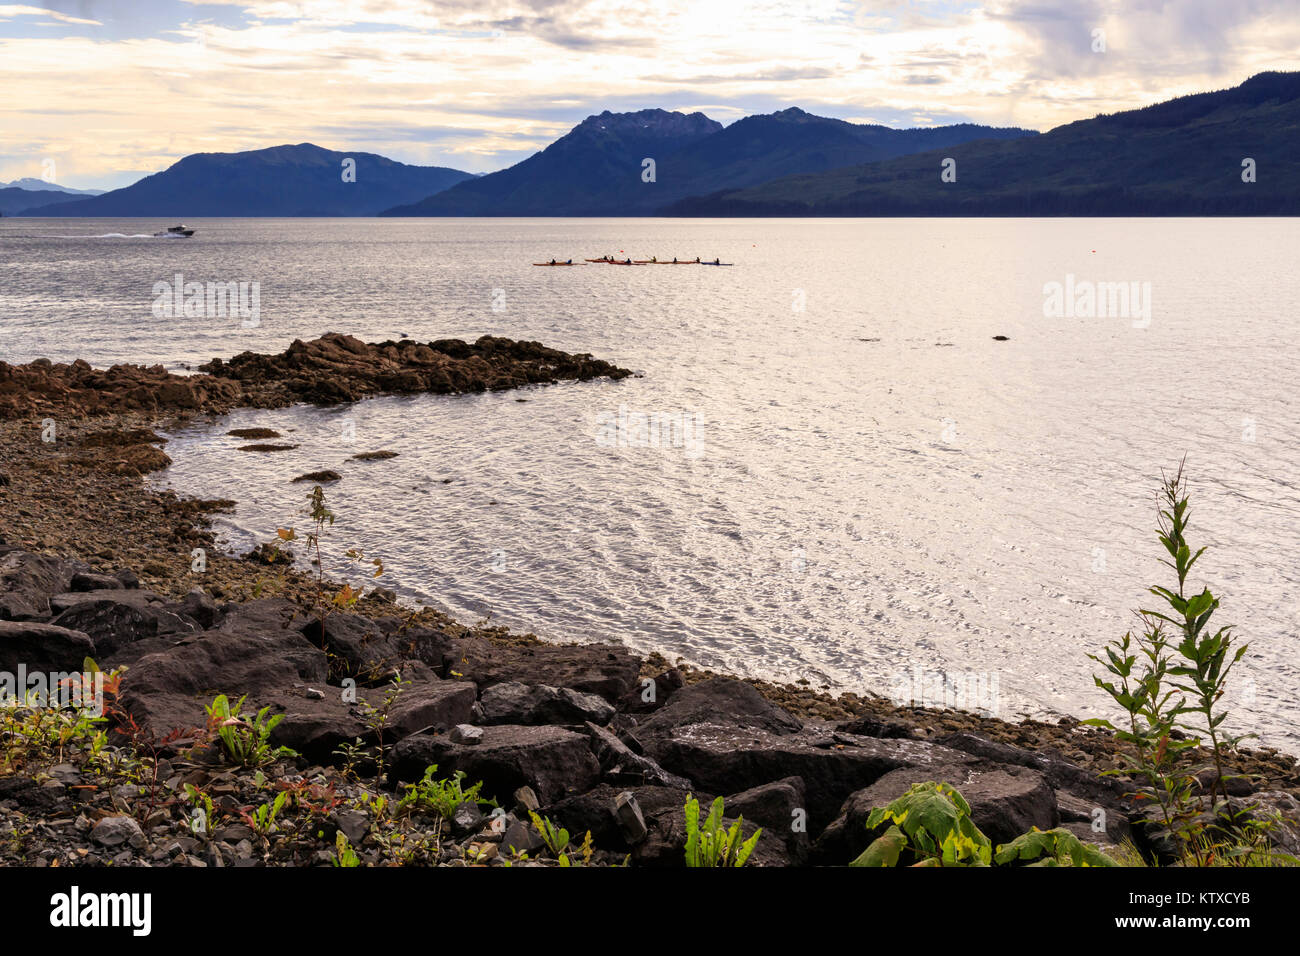 Icy Strait Point, near Hoonah, shore and kayaks, distant mountains, summer, Chichagof Island, Inside Passage, Alaska, United States of America, North  Stock Photo